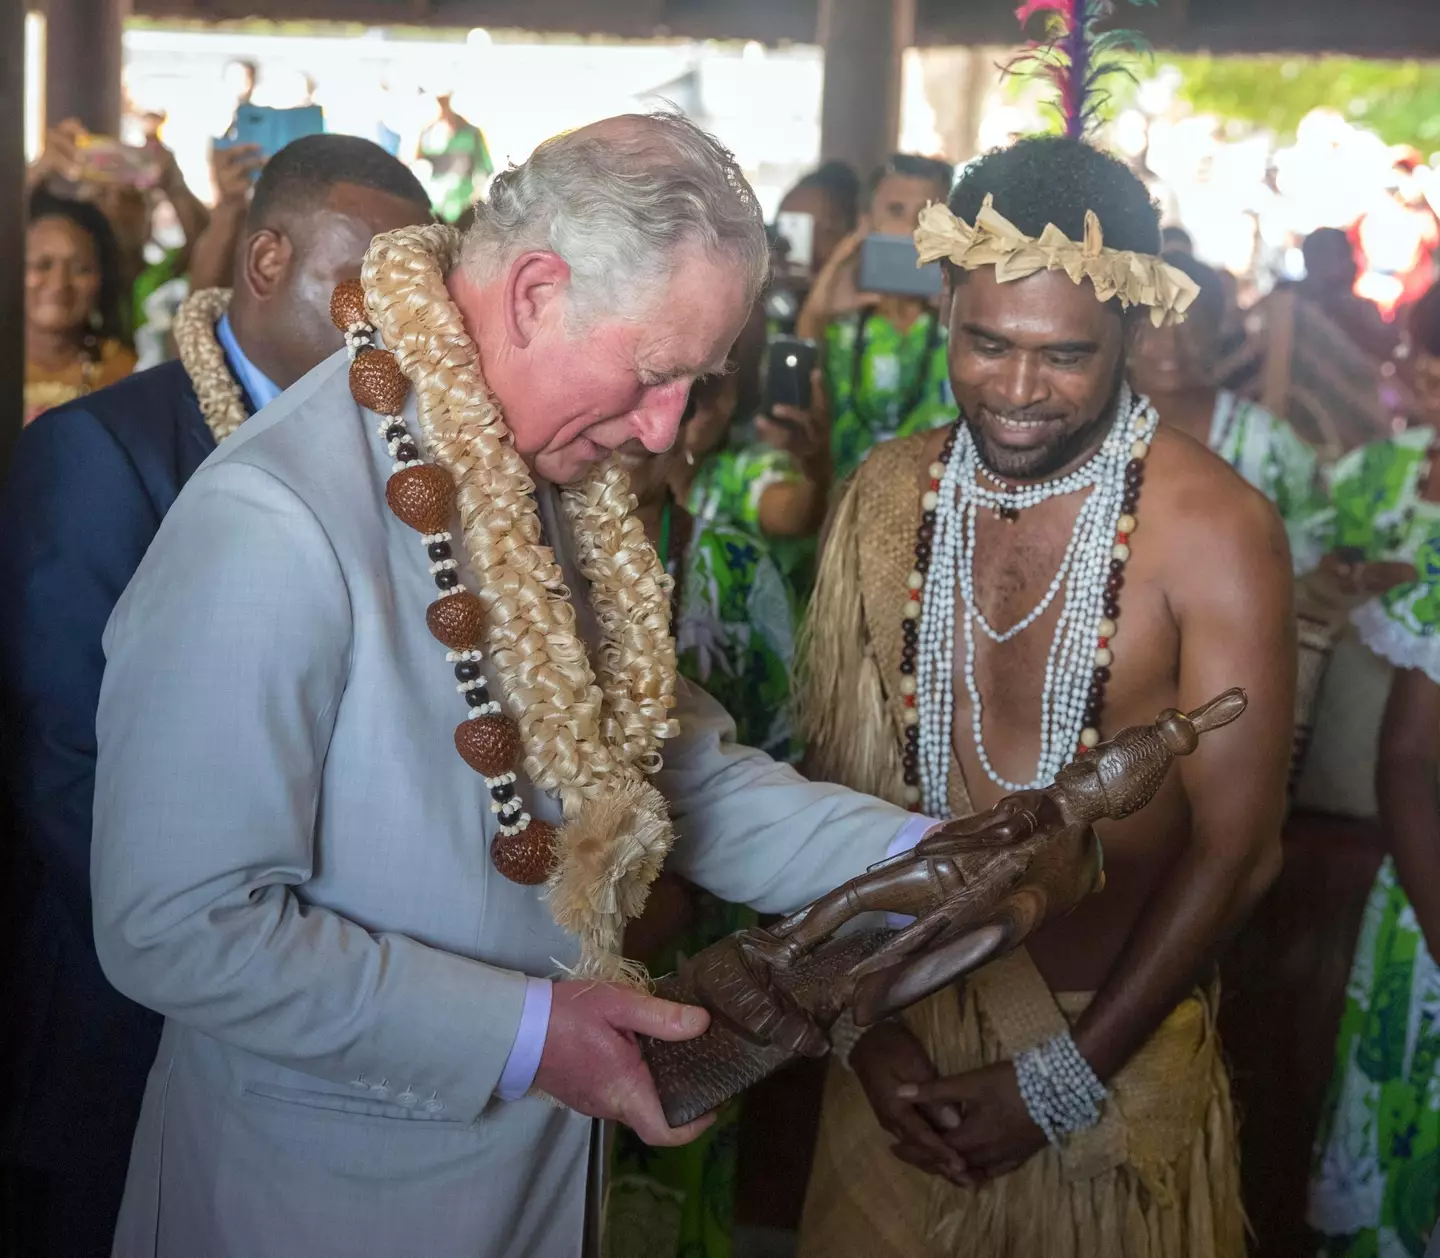 The then-Prince Charles has visited the island of Vanuatu.